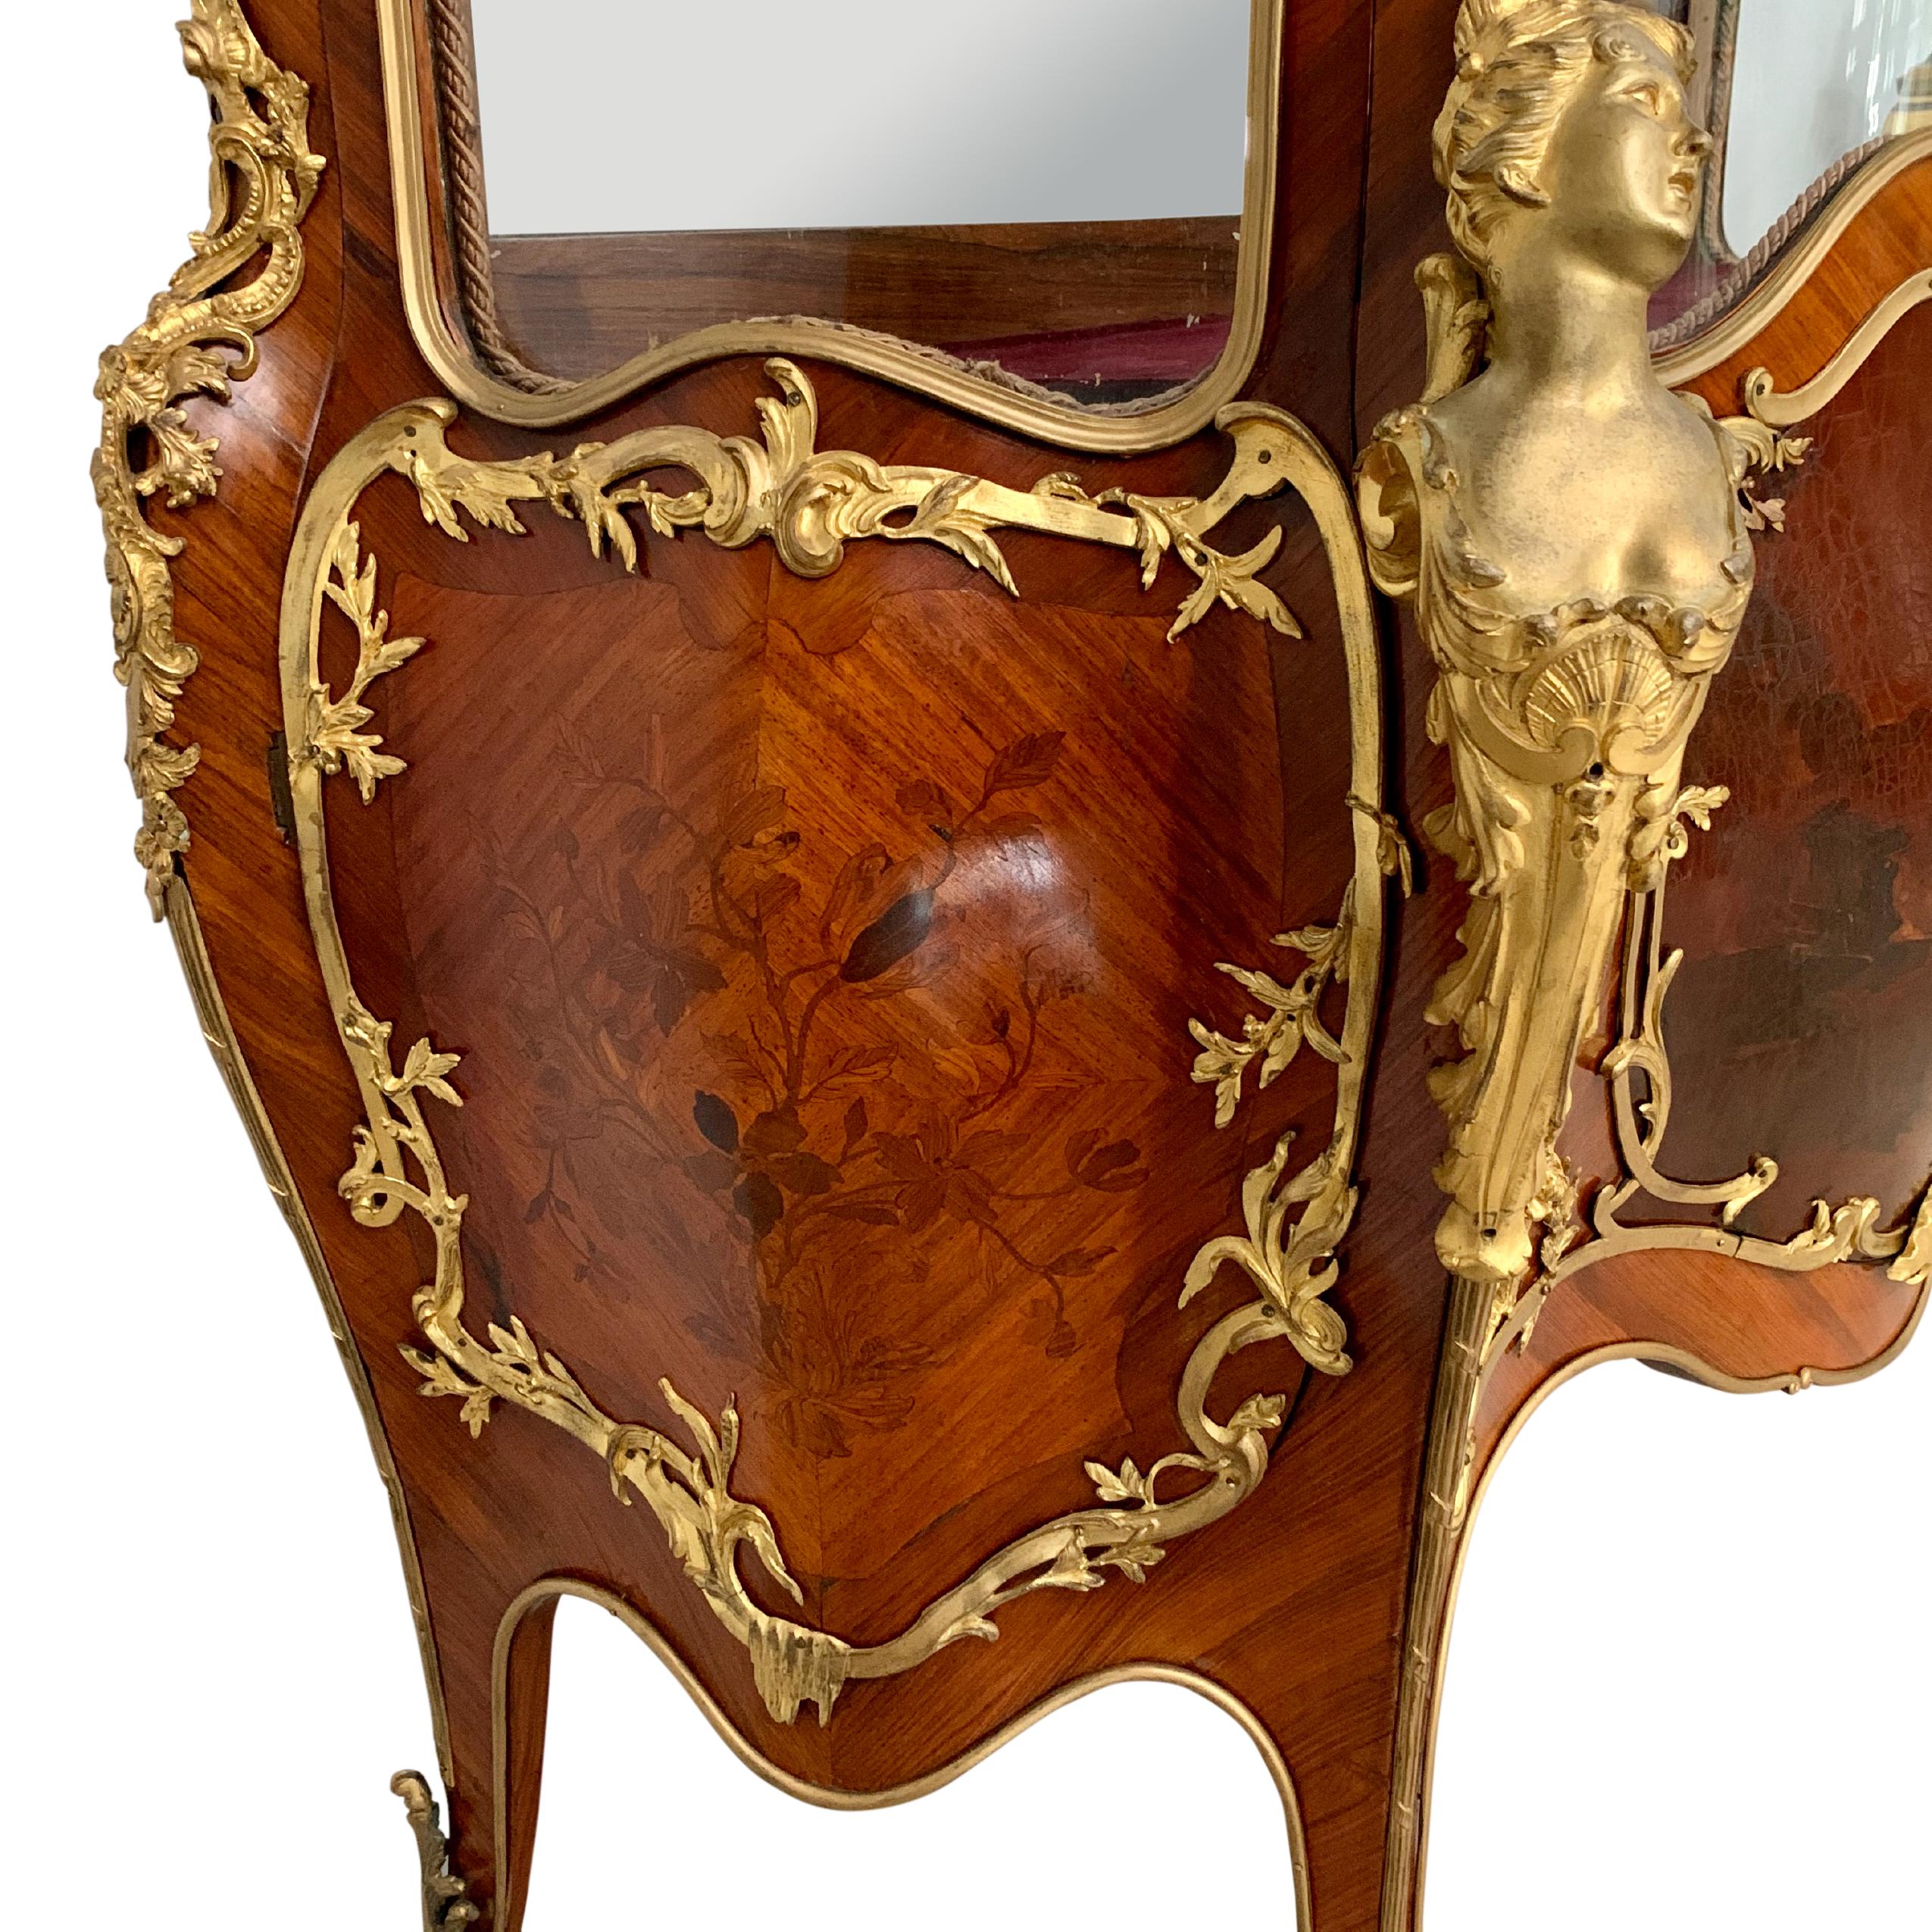 A Very Fine French 19th CenturyOrmolu-Mounted Louis XV Style Double-Door Vitrine For Sale 6